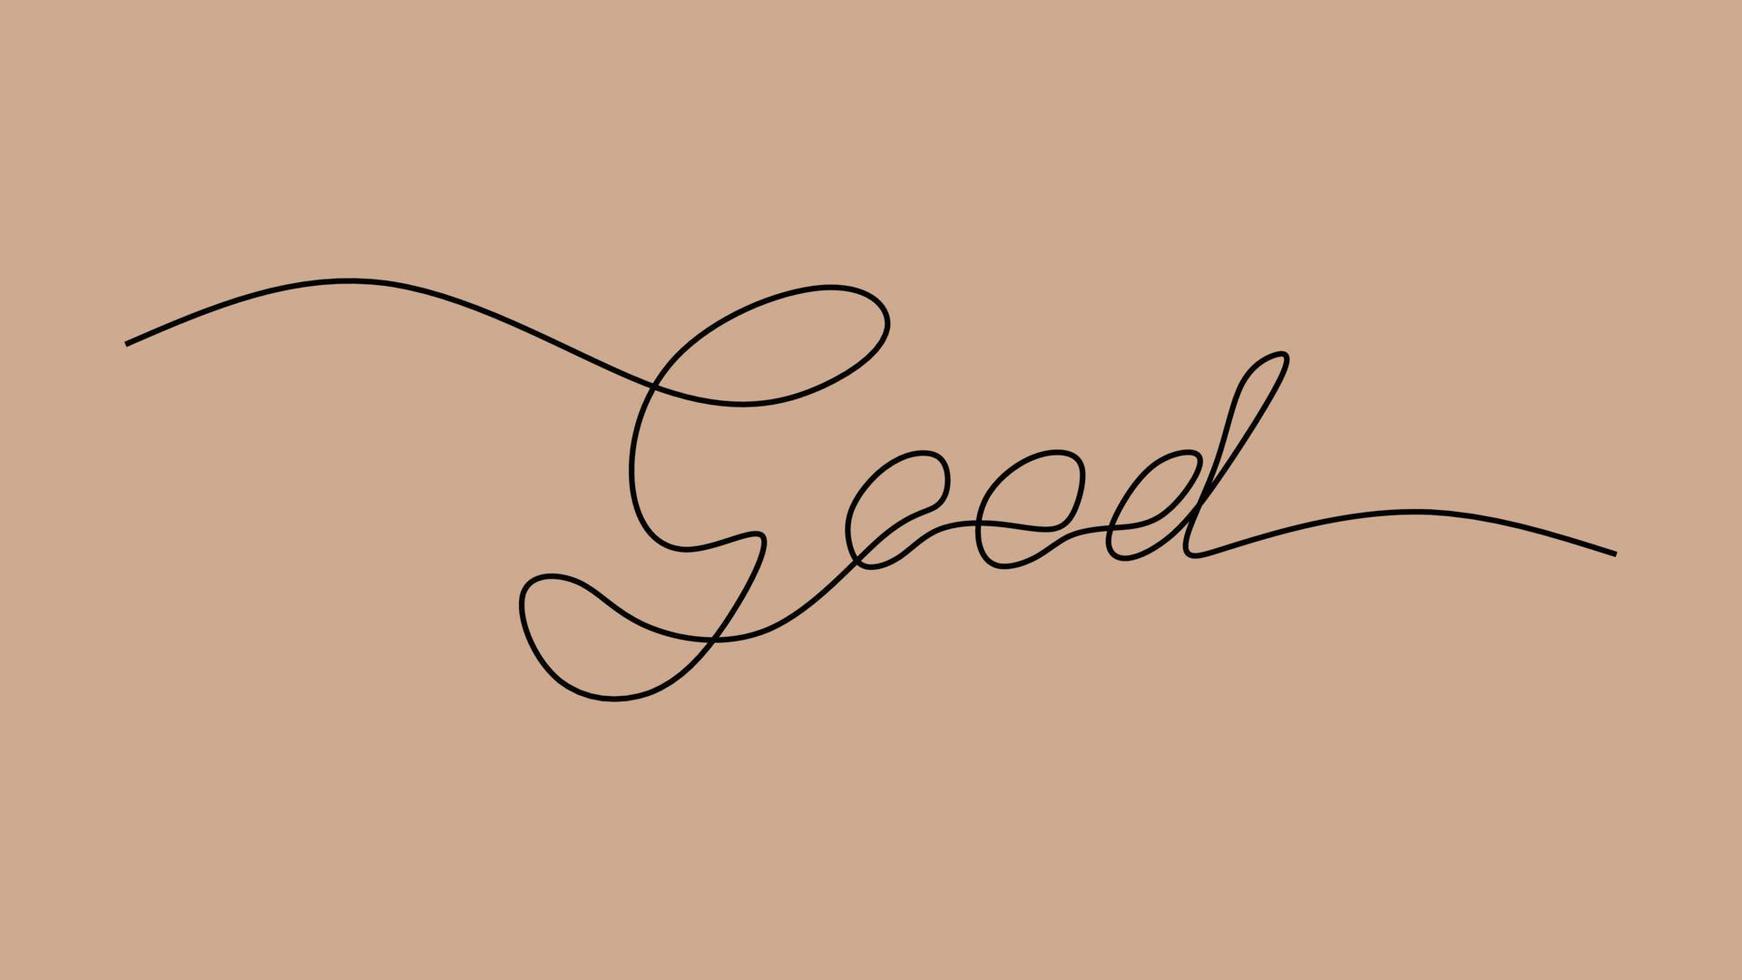 Good word text oneline continuous editable line art vector